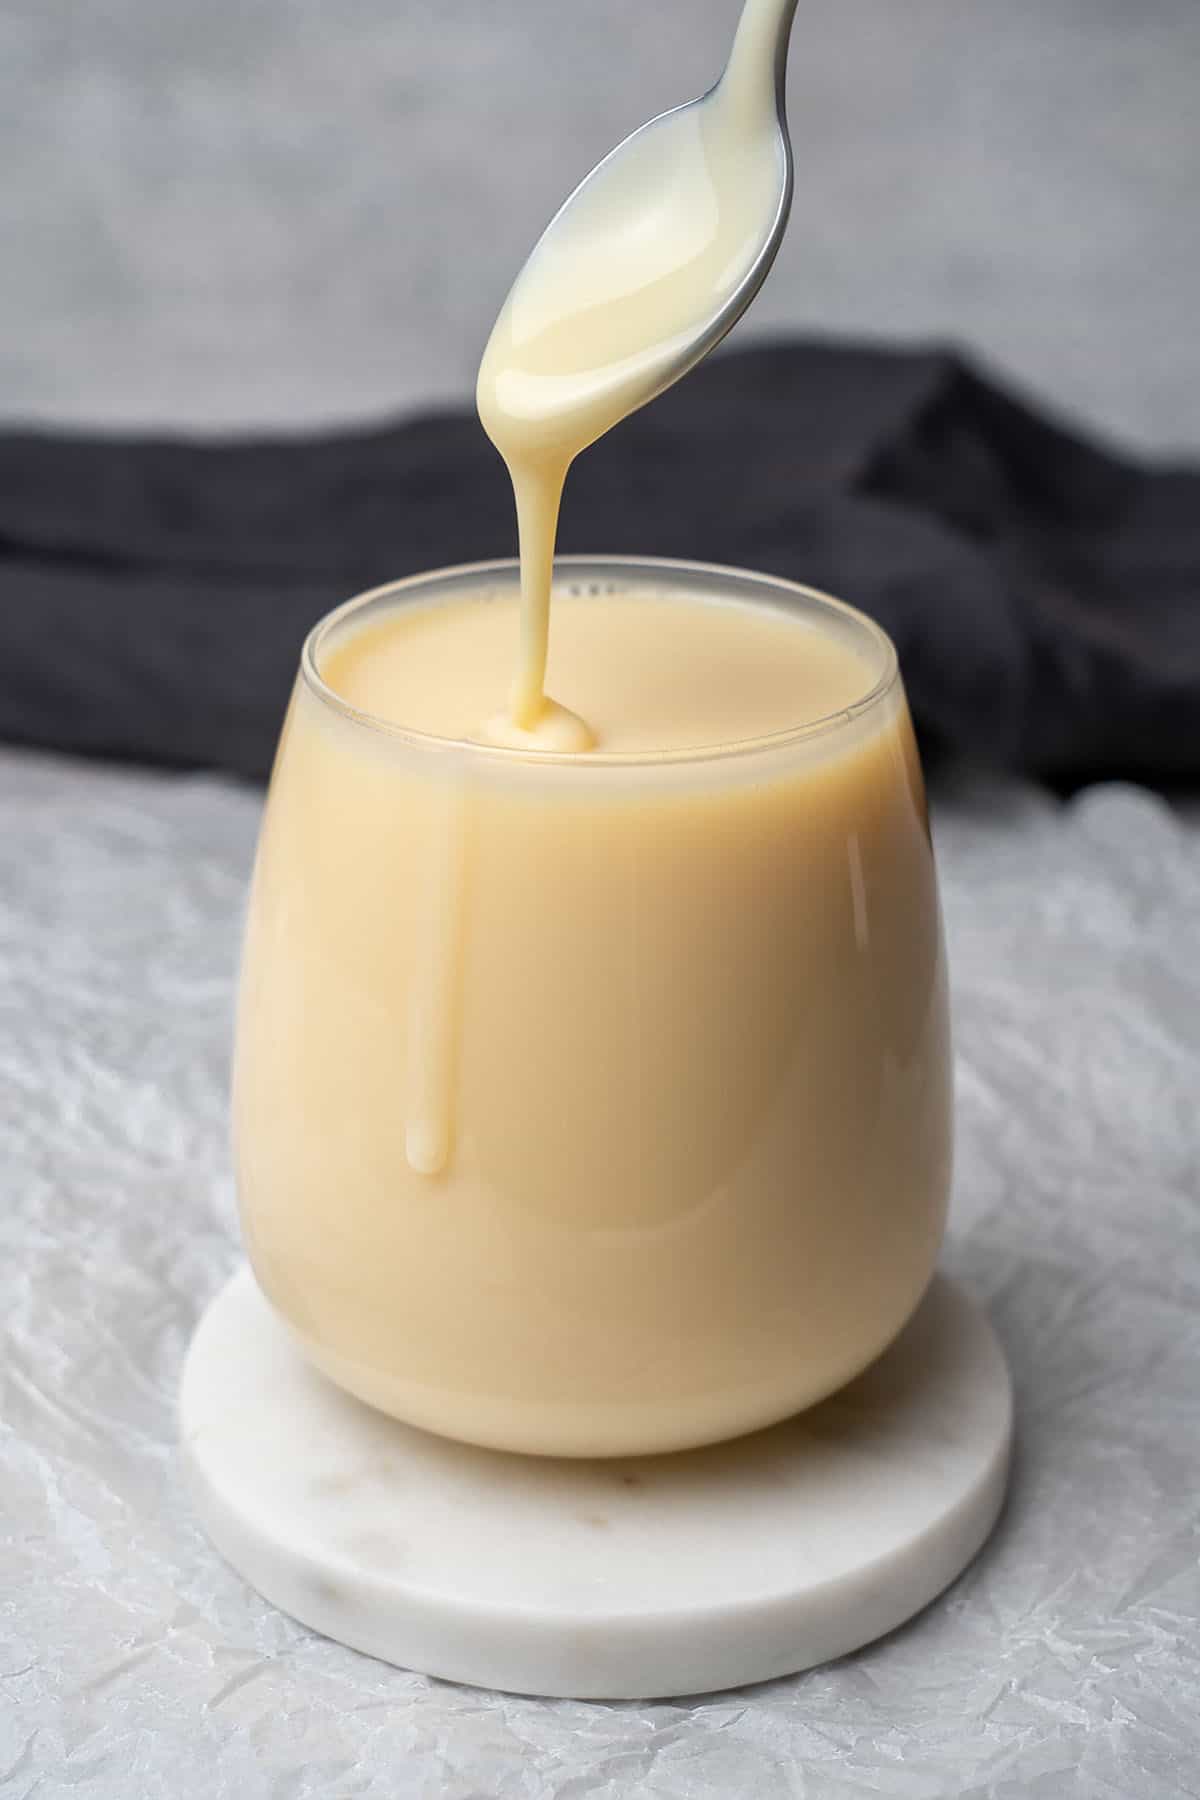 sweetened condensed milk in a glass.